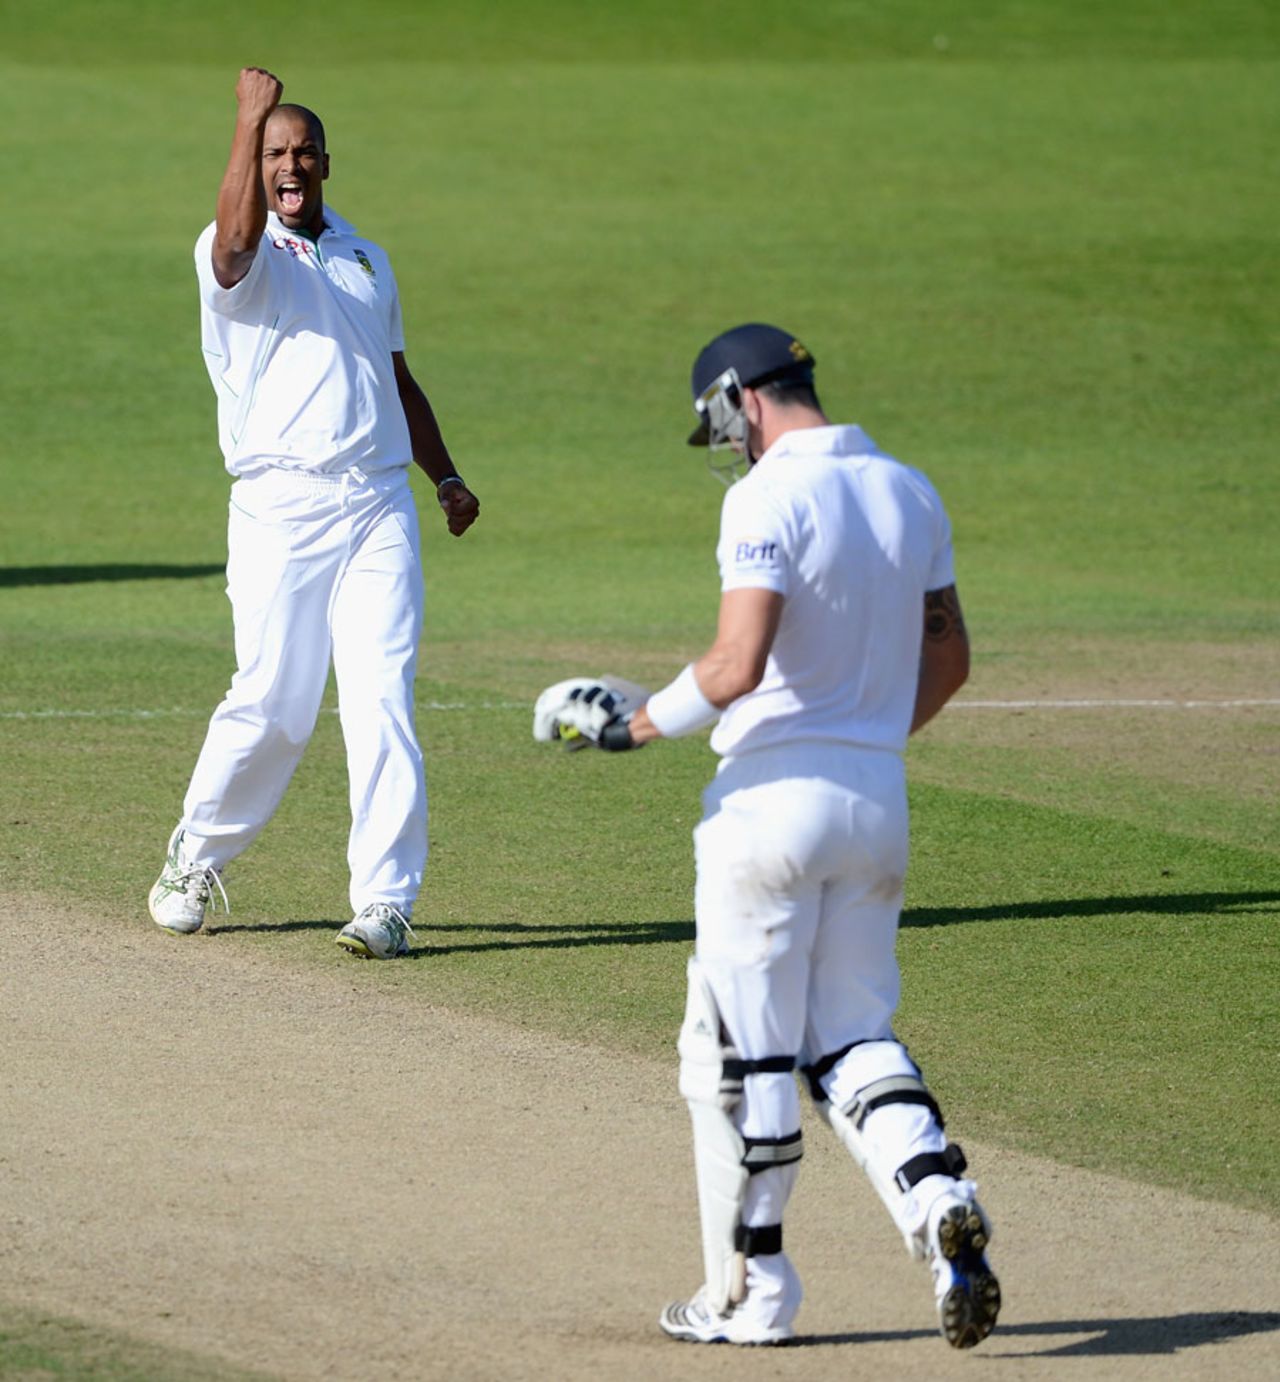 Vernon Philander had Kevin Pietersen caught at mid-on, England v South Africa, 2nd Investec Test, Headingley, 5th day, August 6, 2012